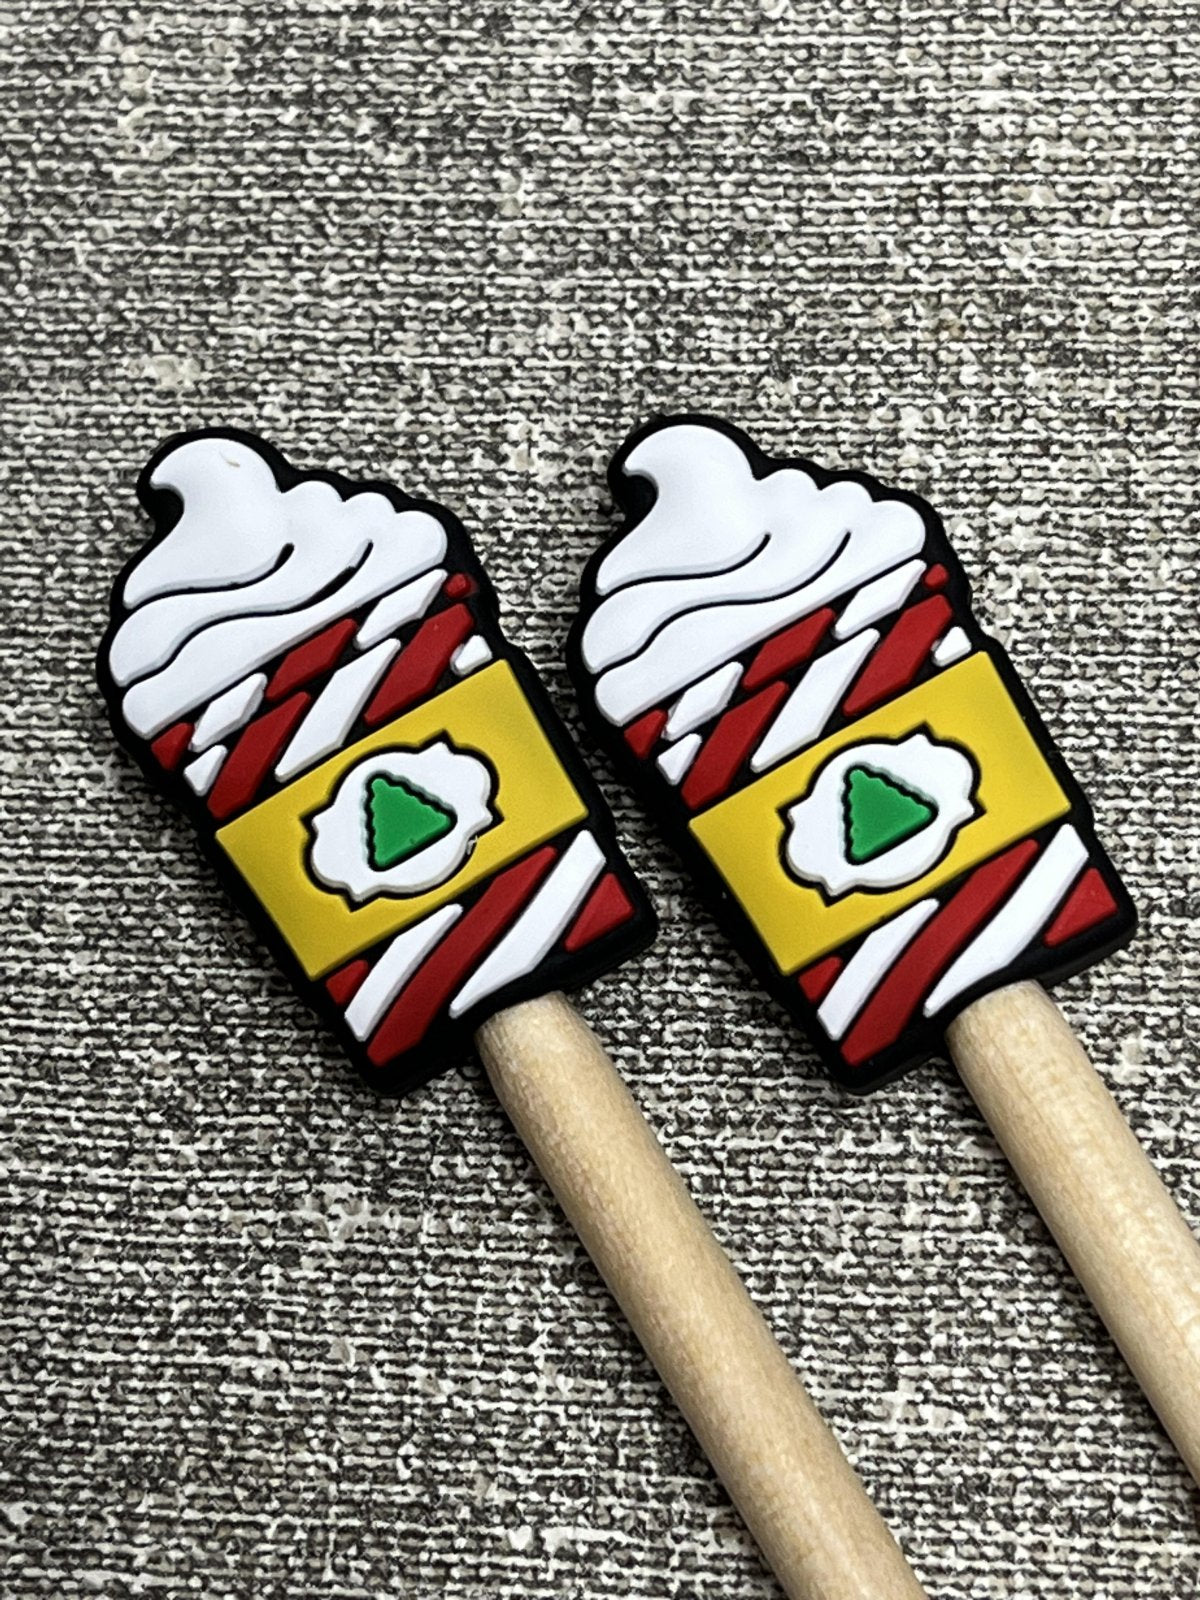 Stitch Stoppers (Christmas)